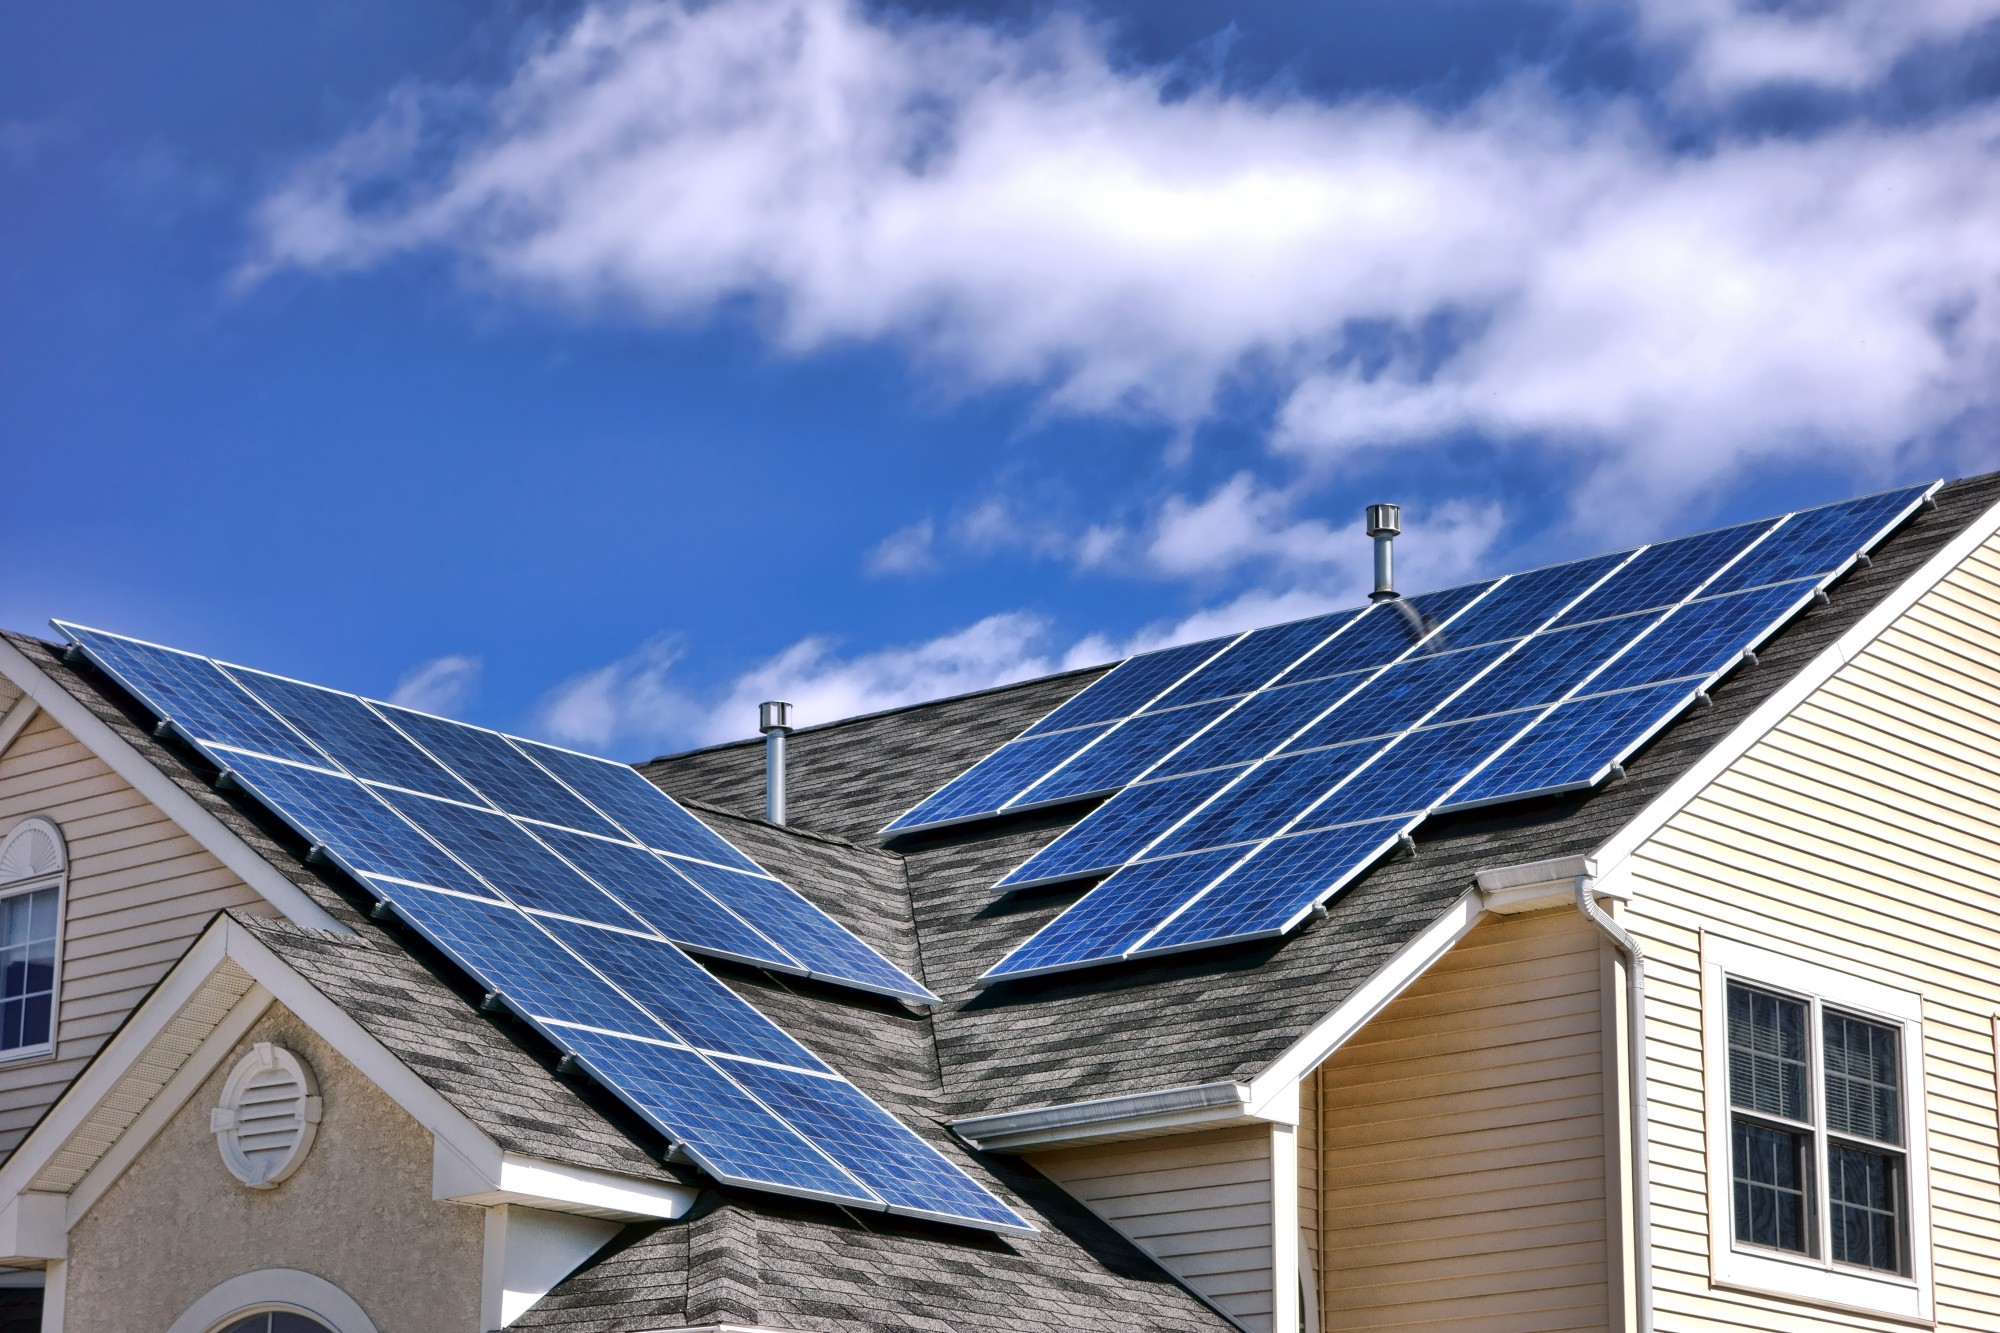 new-solar-project-in-ontario-generate-power-and-buzz-fingerlakes1